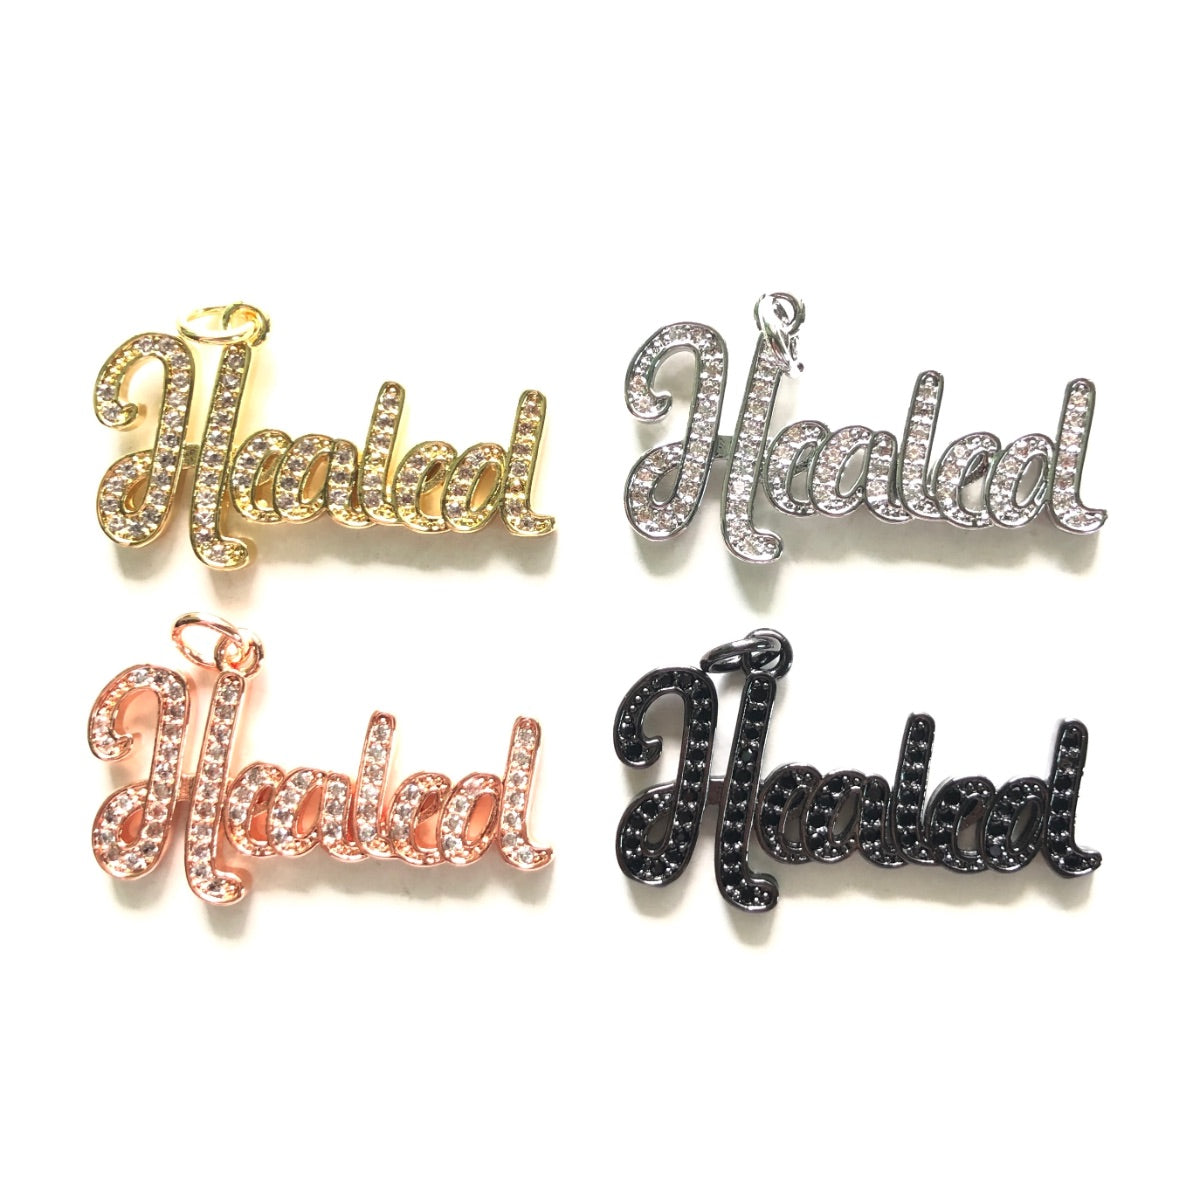 10pcs/lot 35*20mm CZ Pave Healed Word Charms CZ Paved Charms Christian Quotes New Charms Arrivals Words & Quotes Charms Beads Beyond